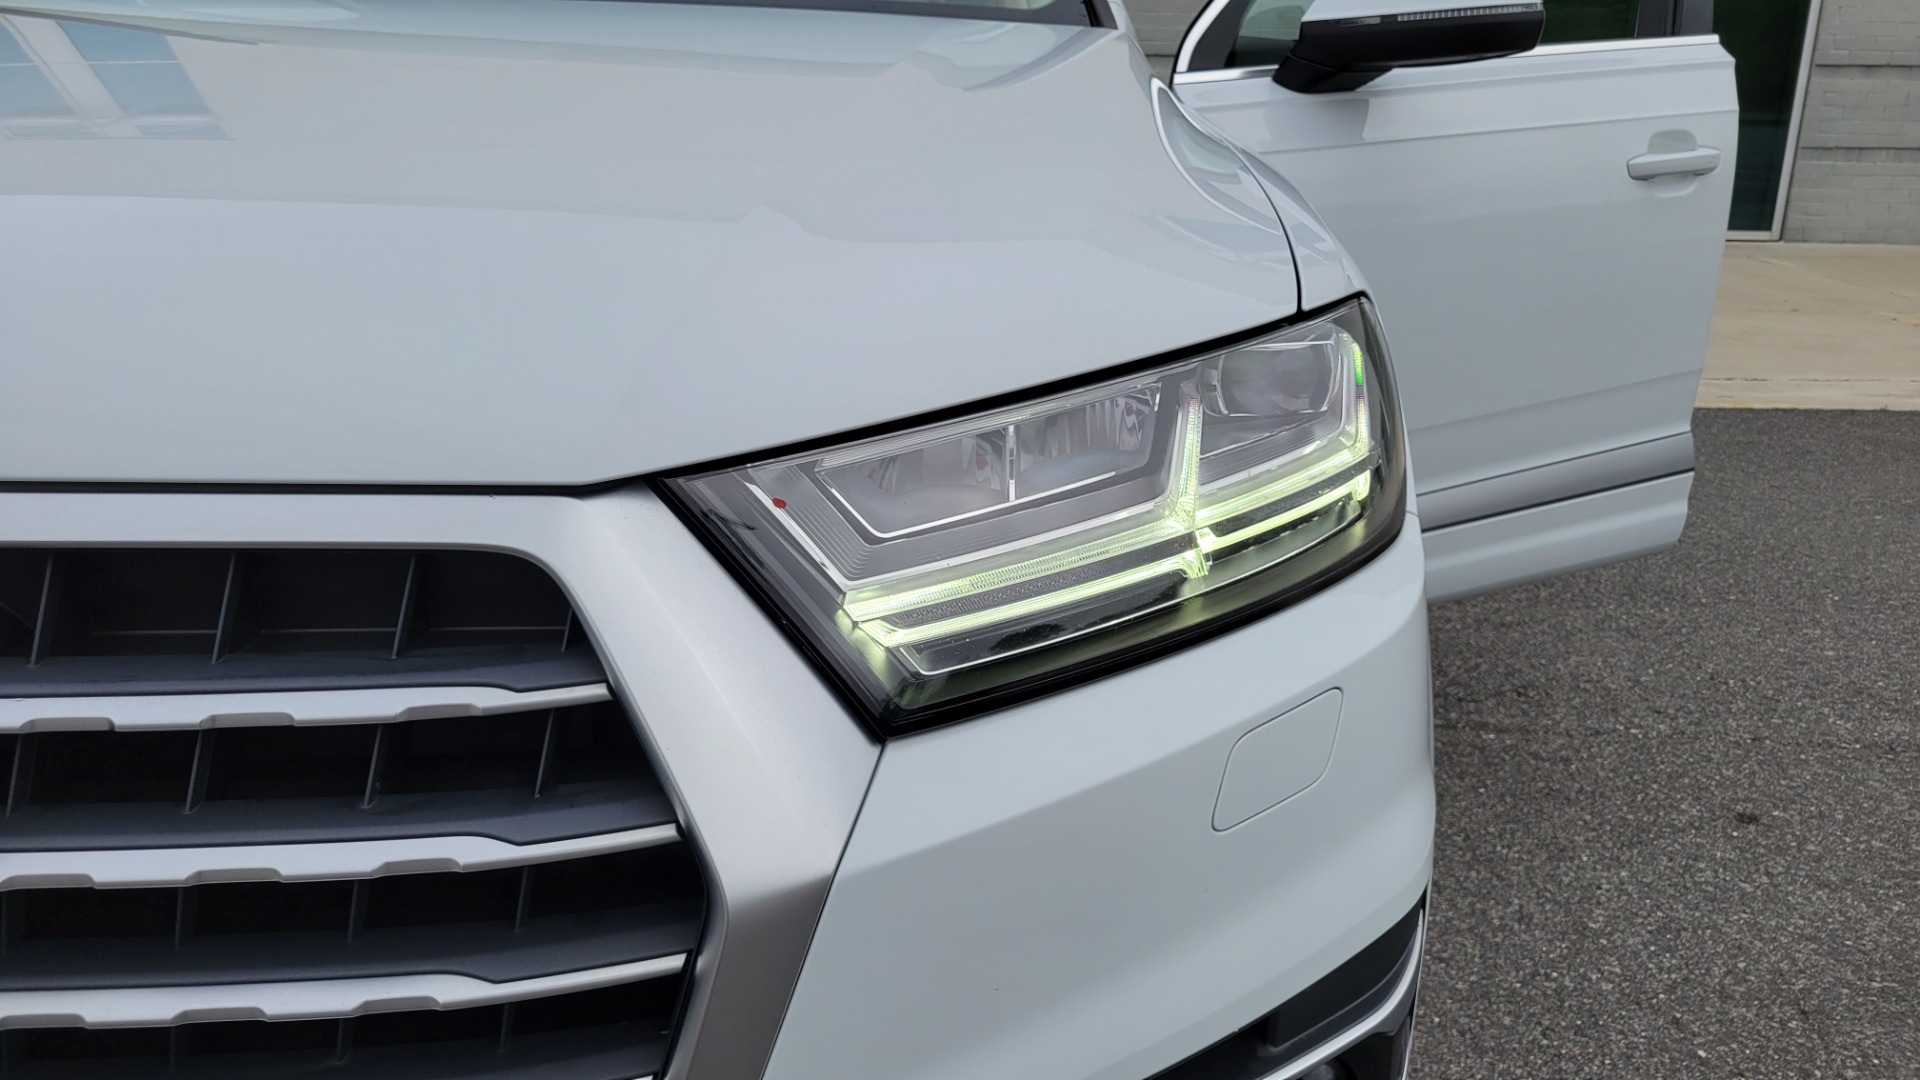 Used 2019 Audi Q7 PRESTIGE / CONV PKG / BOSE / HUD / CLD WTHR / TOWING / REARVIEW for sale $51,995 at Formula Imports in Charlotte NC 28227 30